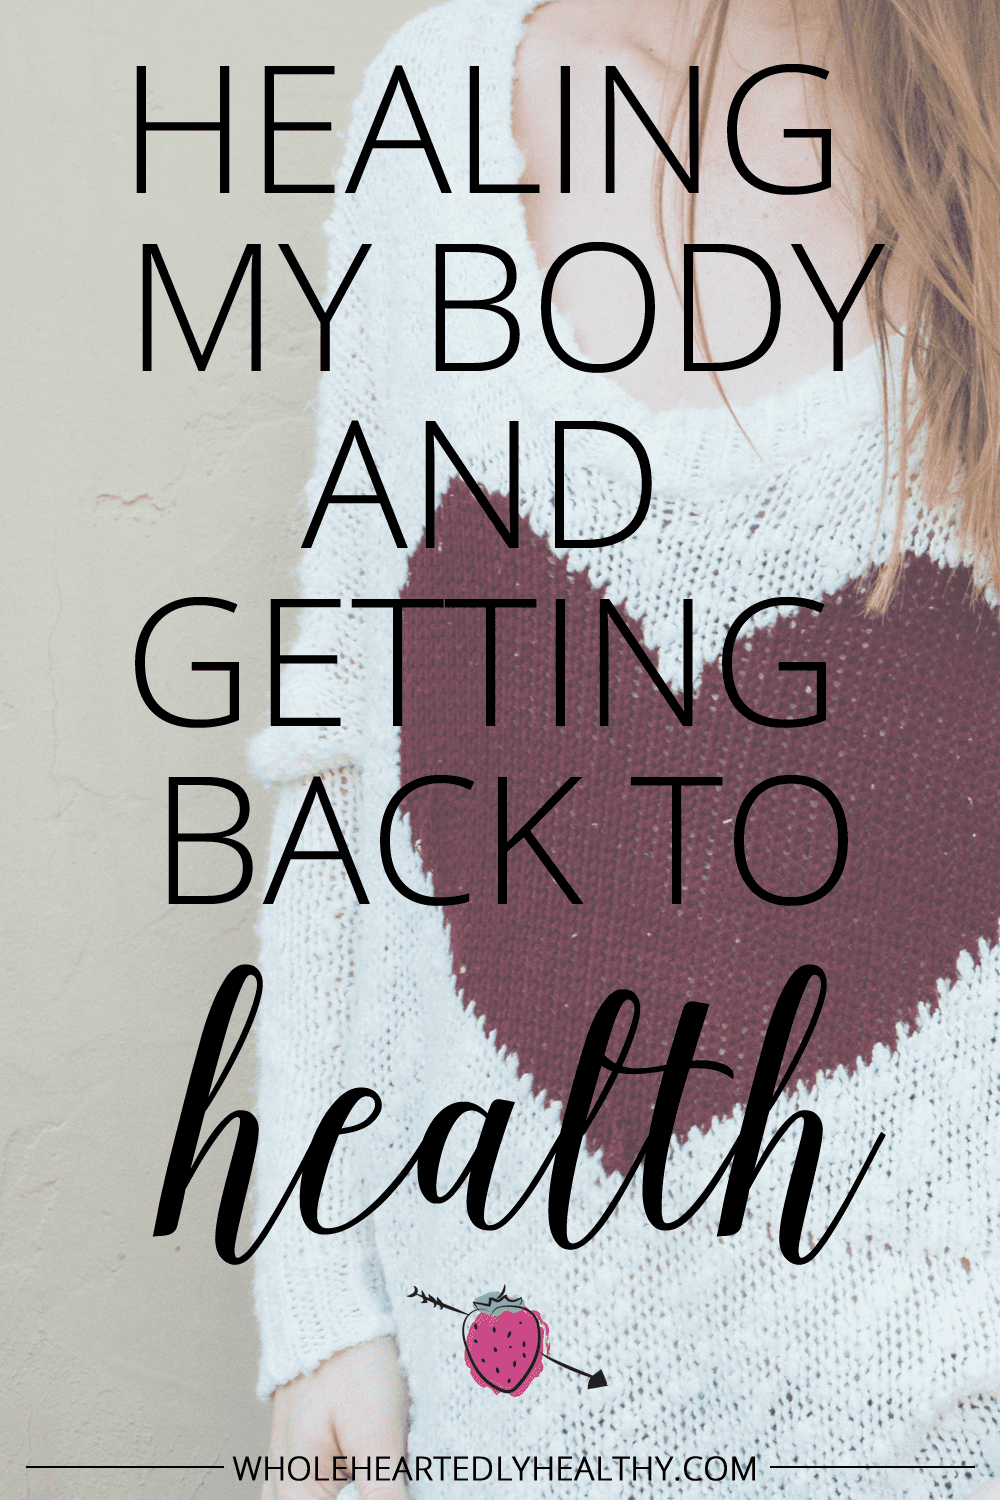 Healing my body and getting back to health